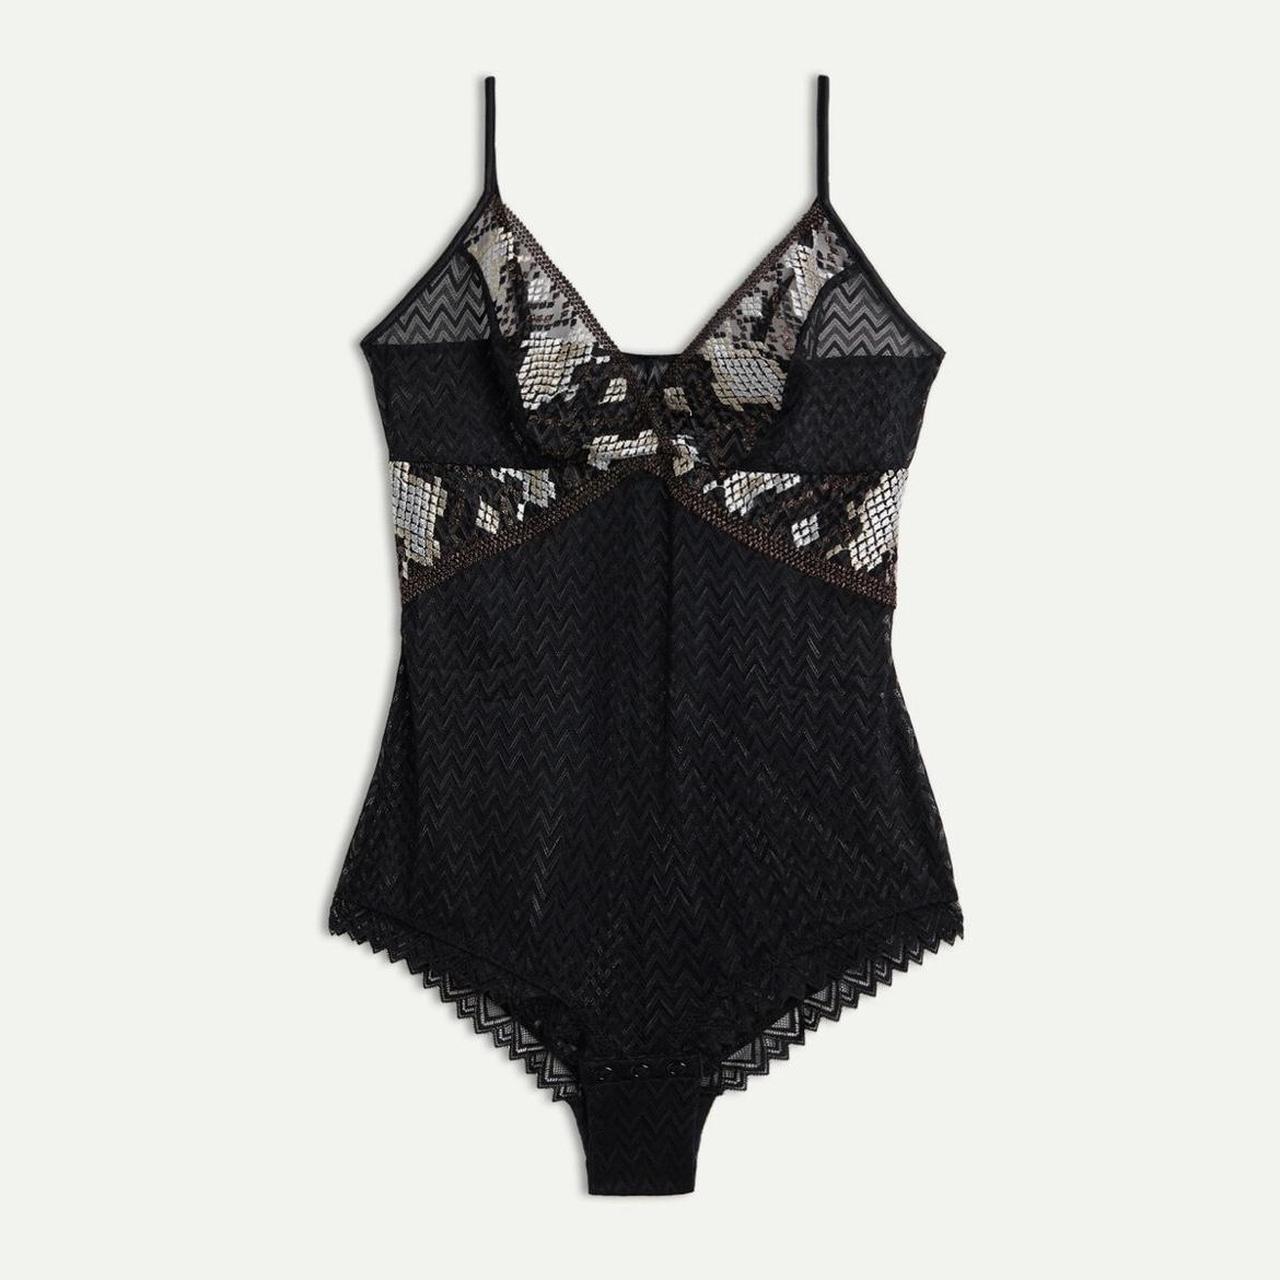 Intimissimi size small black lace bodysuit with gold